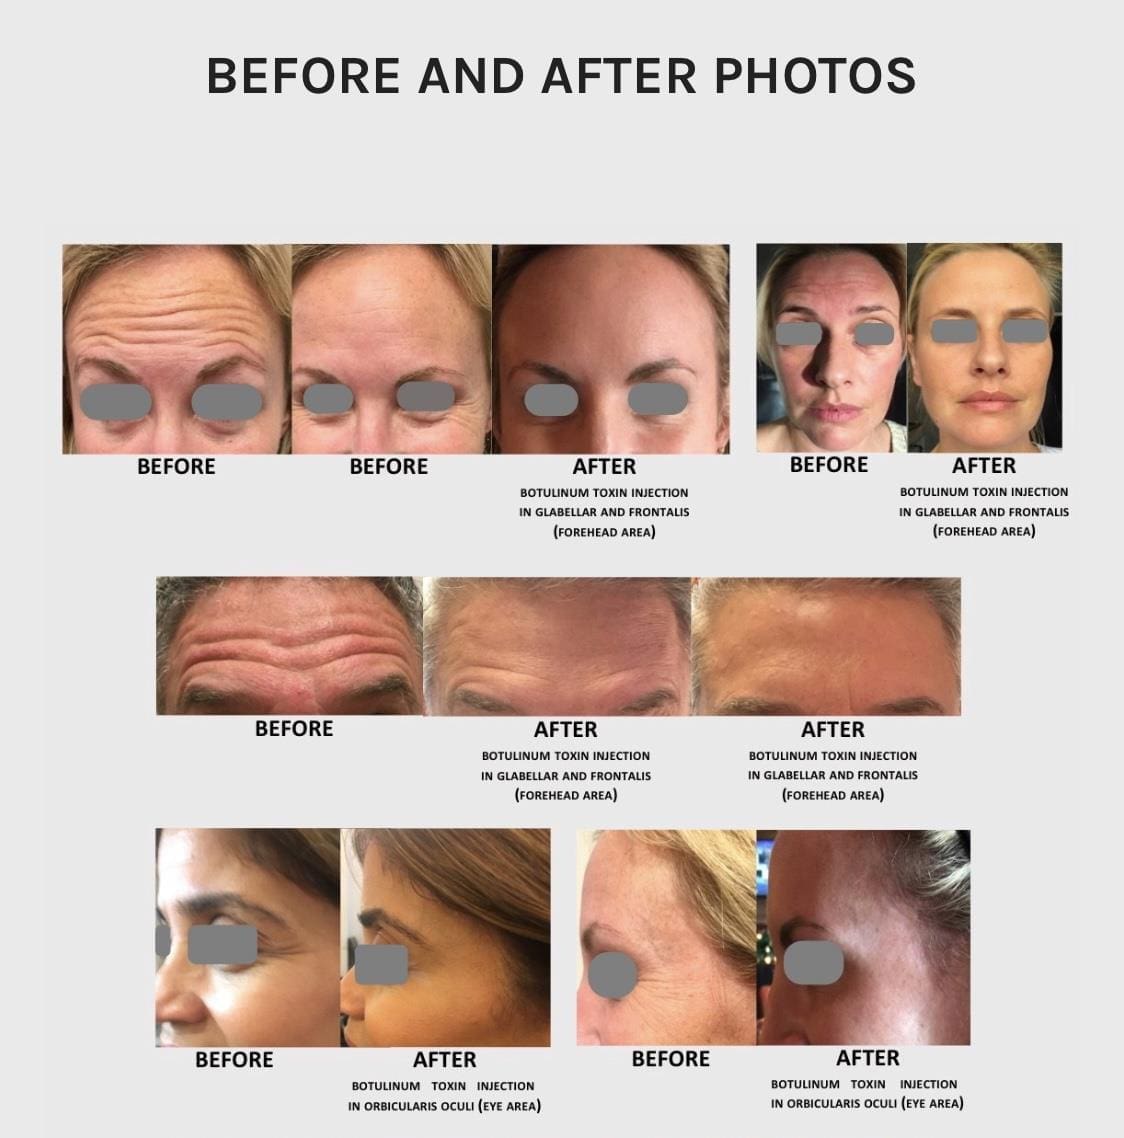 A series of photos showing before and after pictures of women 's face.